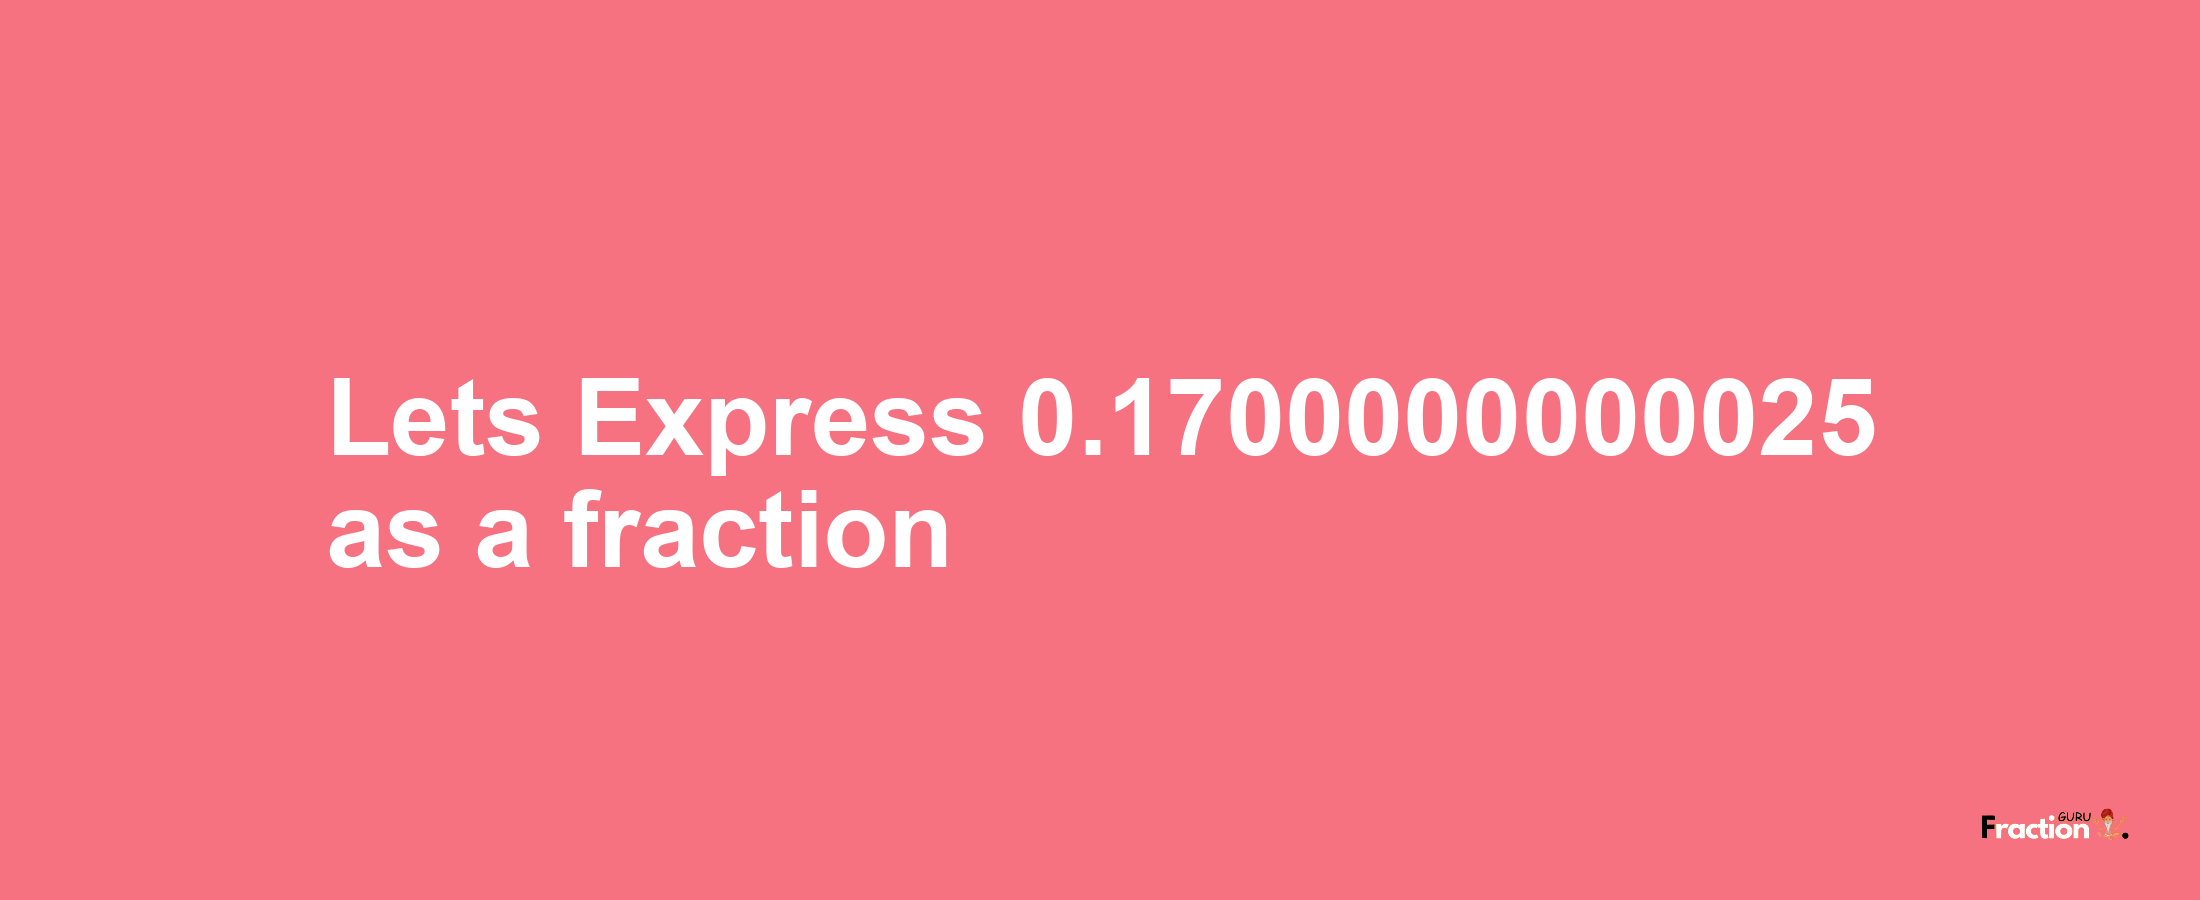 Lets Express 0.1700000000025 as afraction